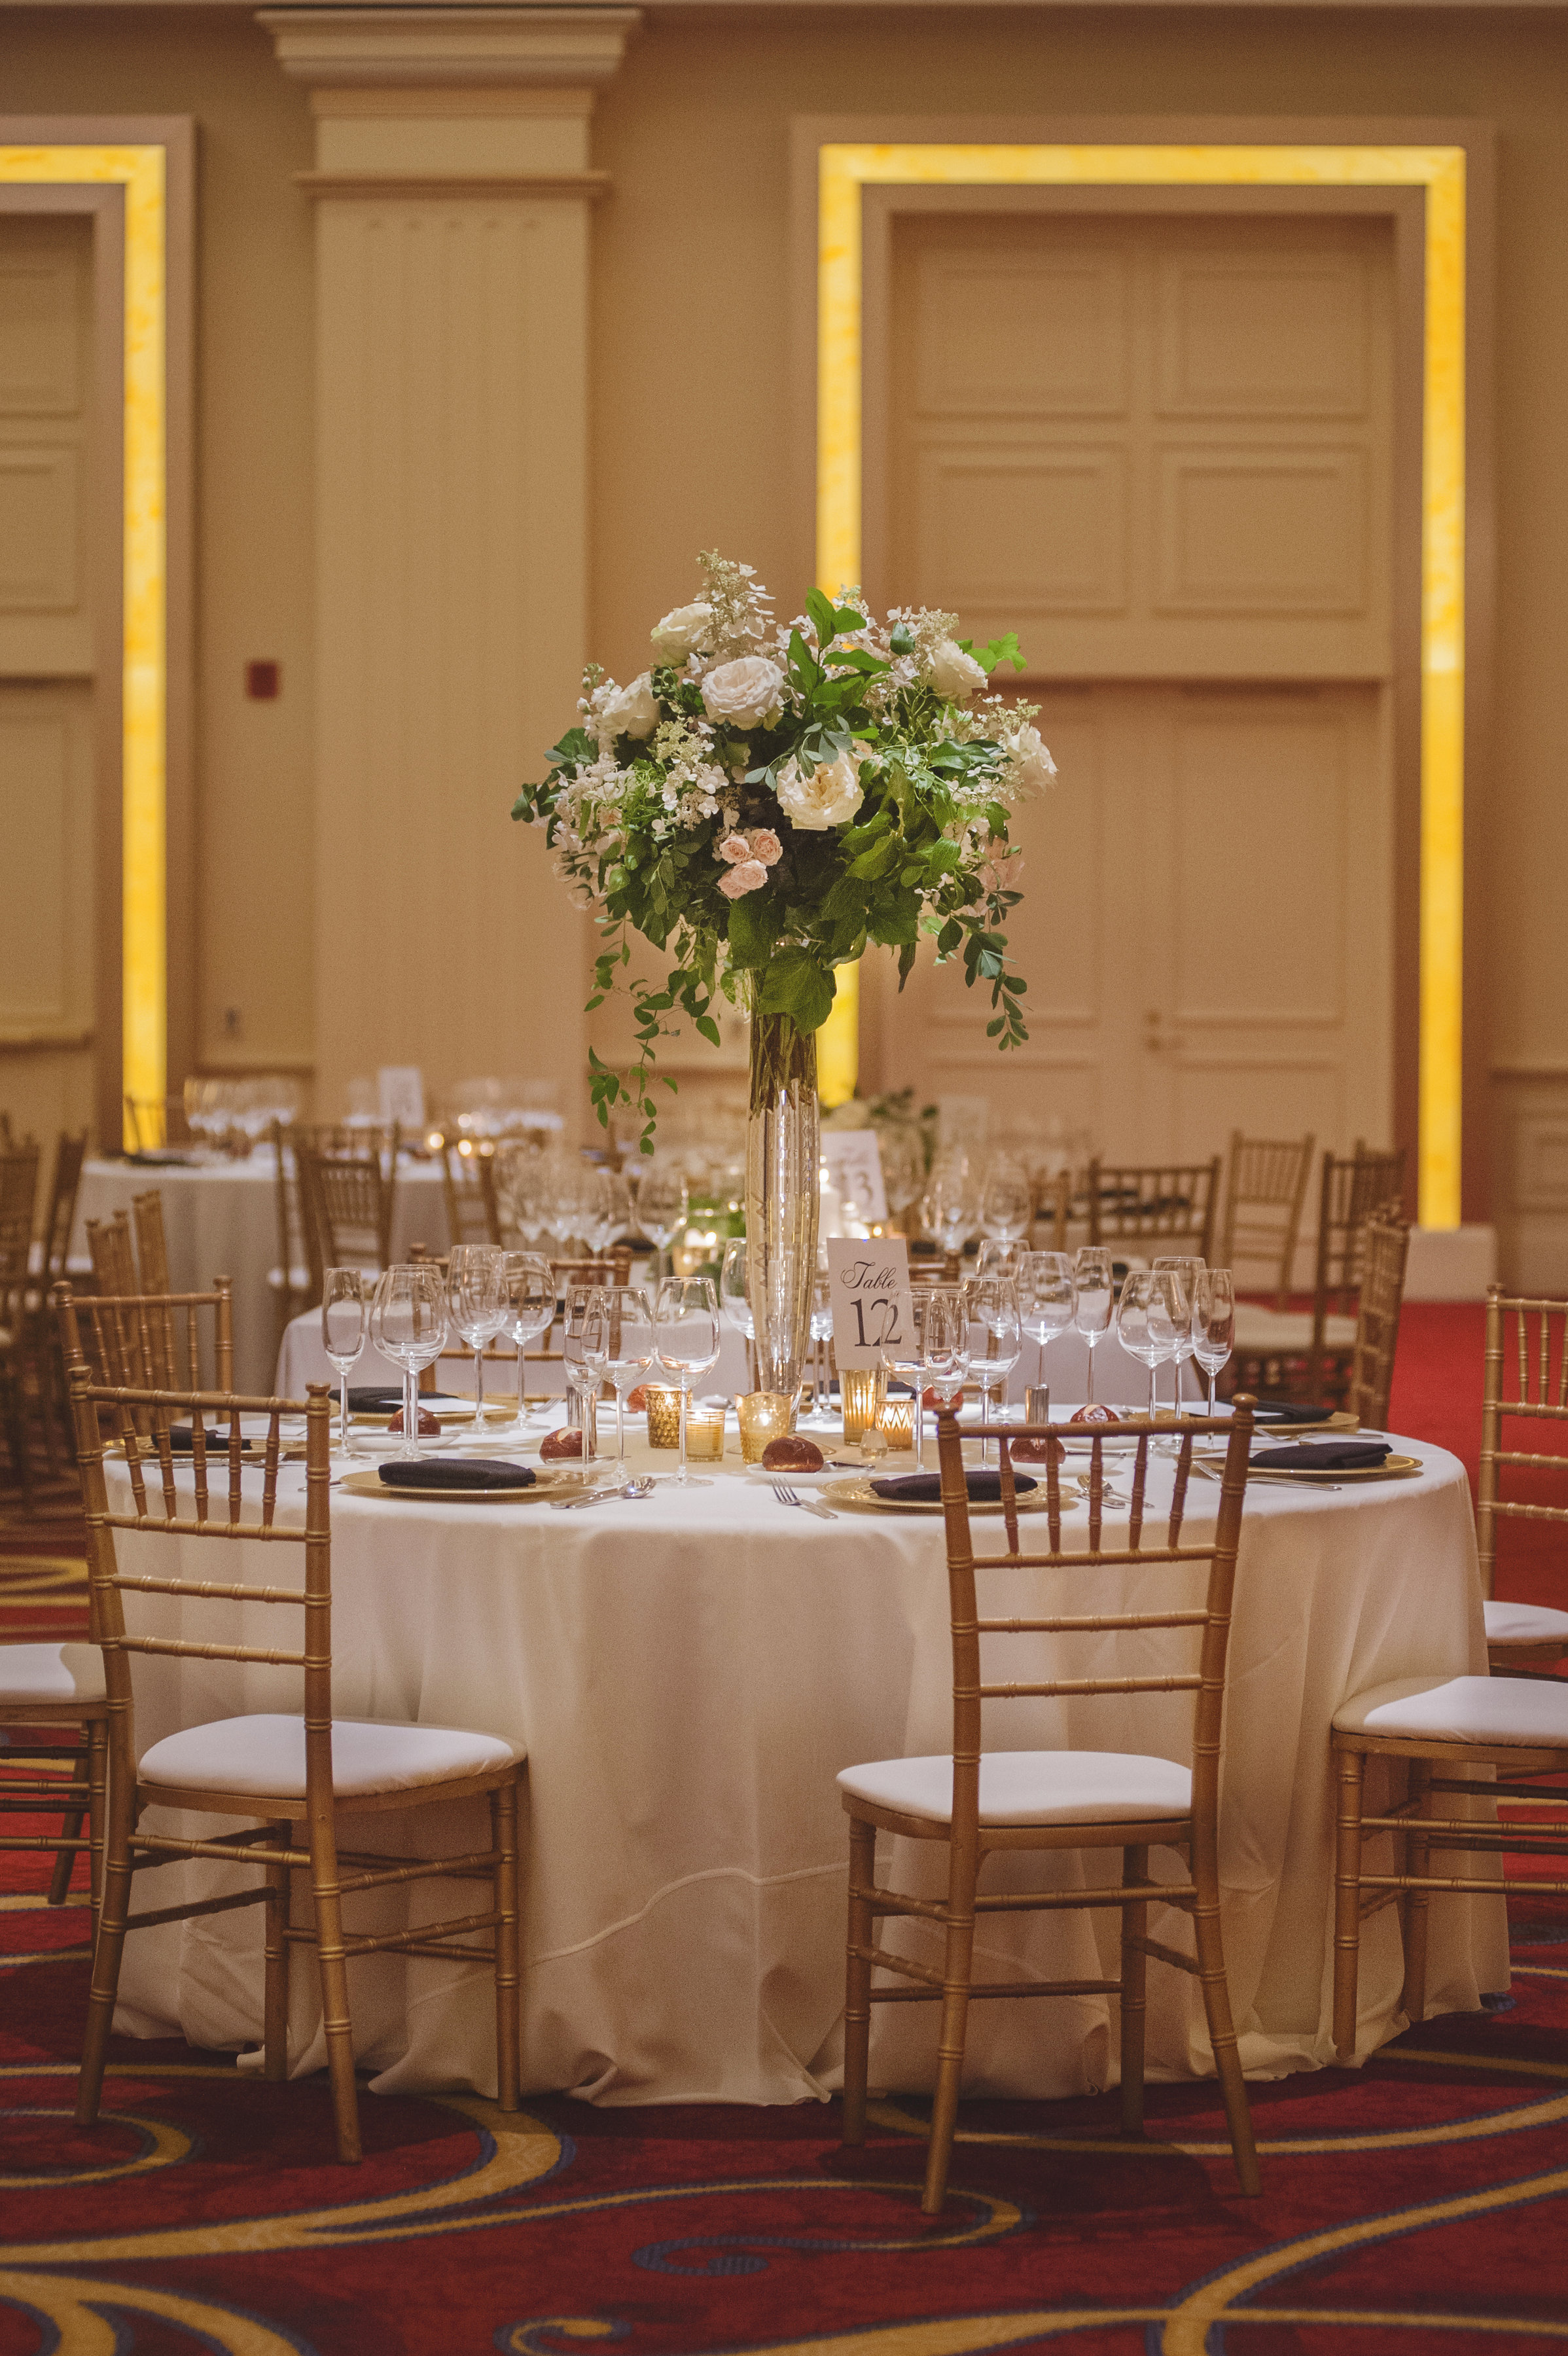 Autumn wedding reception room with classic ivory and green arrangements at JW Marriott Chicago.